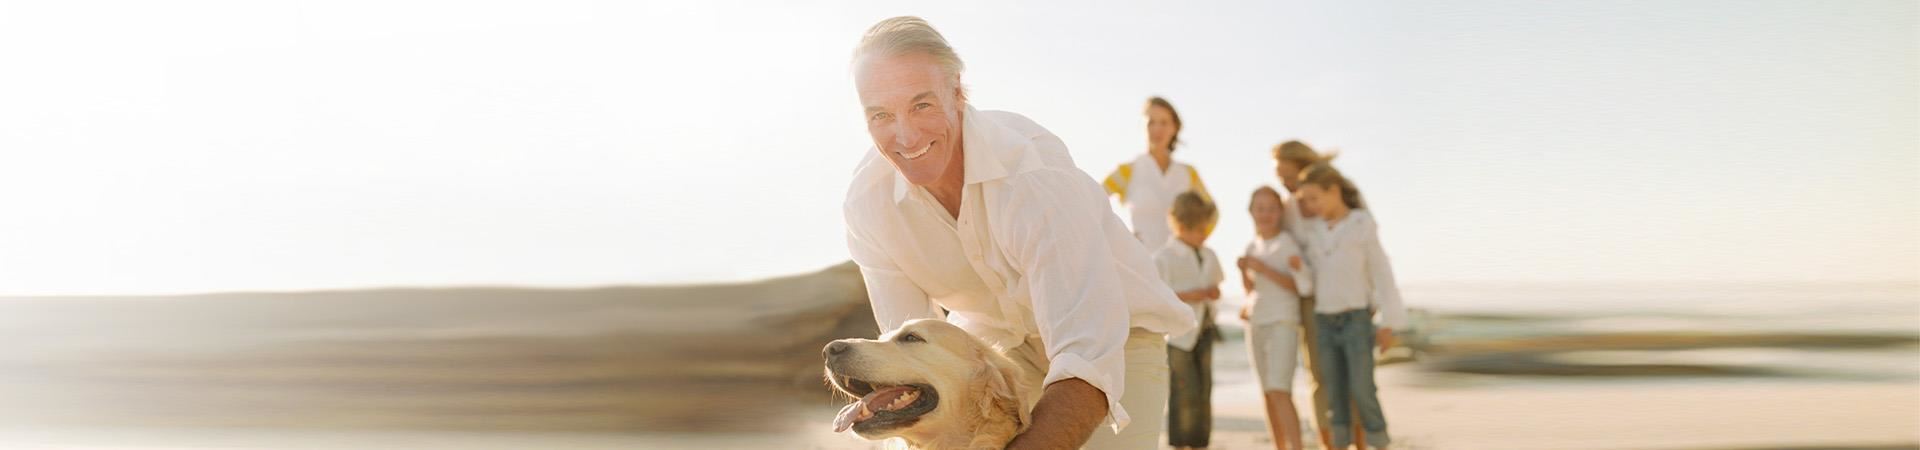 Image of a gray-haired man with blue eyes on the beach, leaning forward while holding a beige golden retriever. The man is wearing a white shirt and beige pants. Slightly blurred in the background to his right, we can see (from left to right) a woman, a boy, two girls, and a teenage girl. 